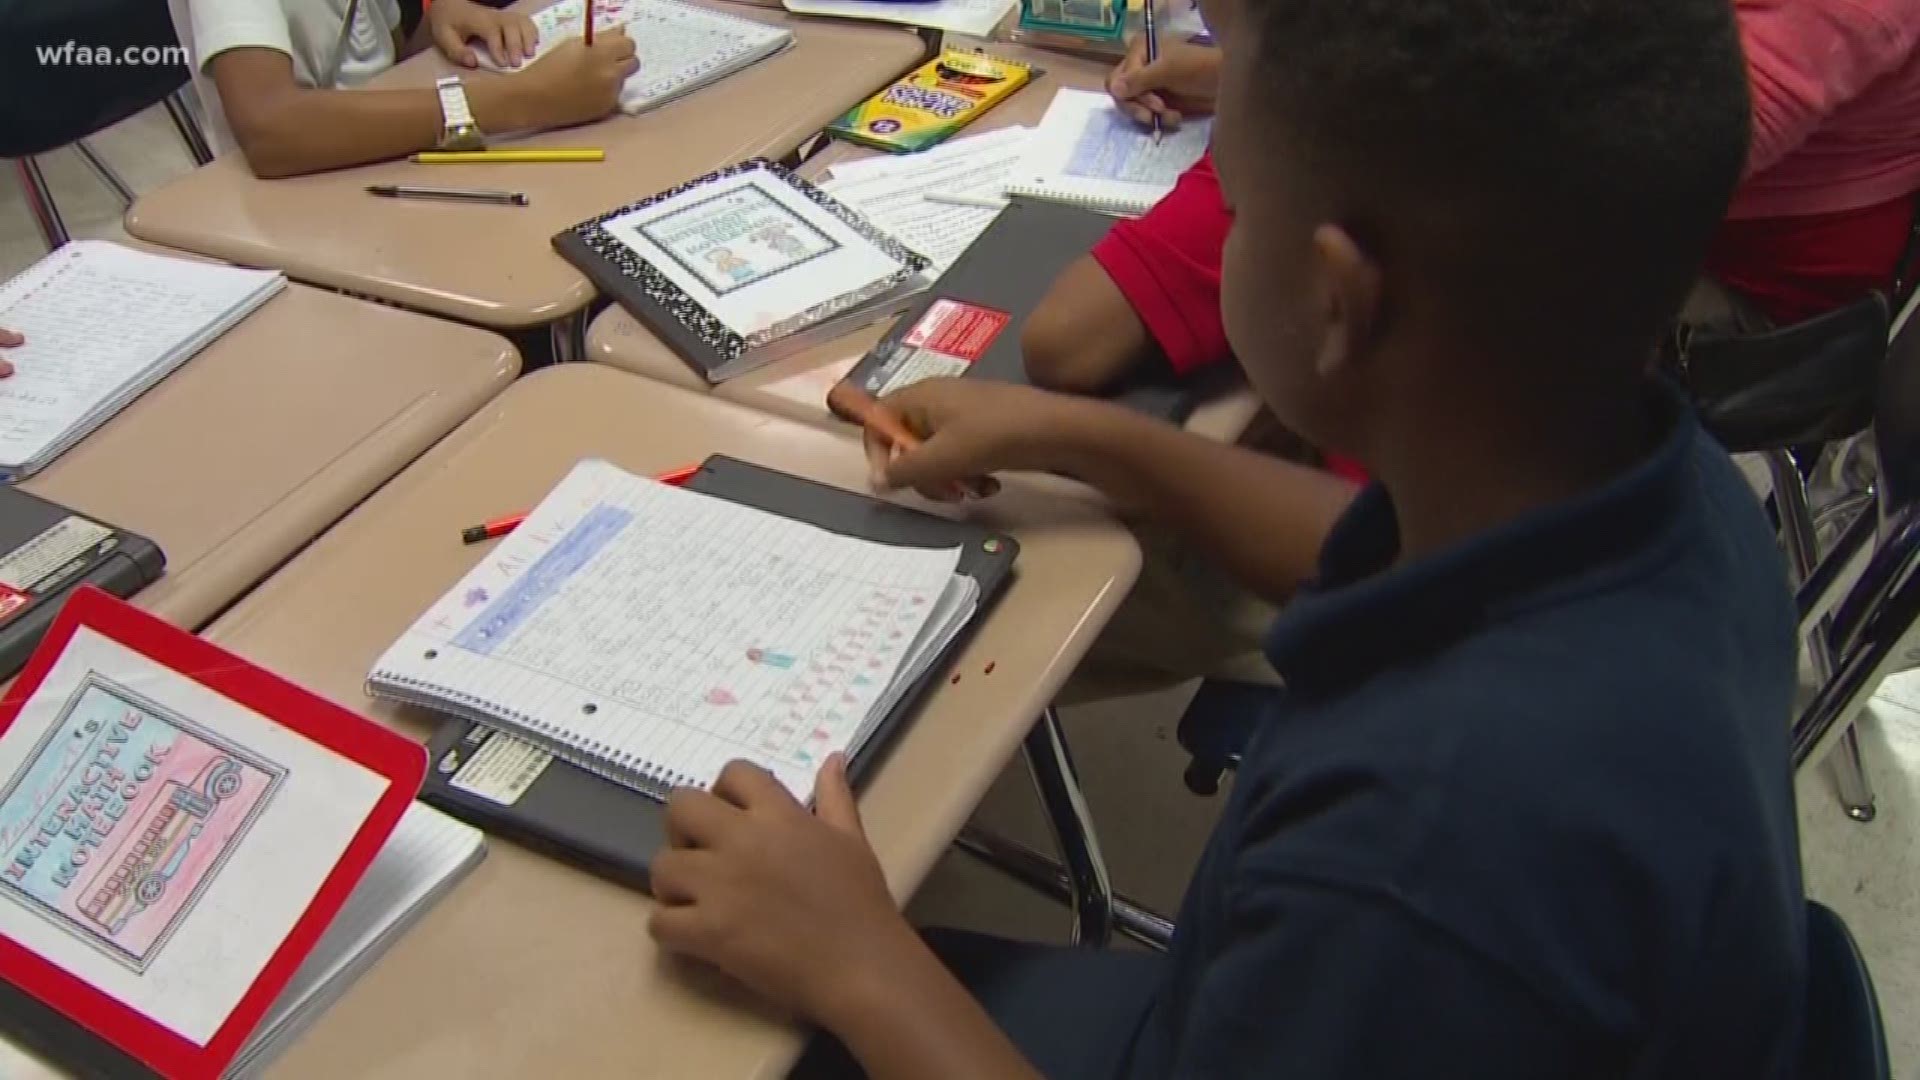 New school district grading system begins this week